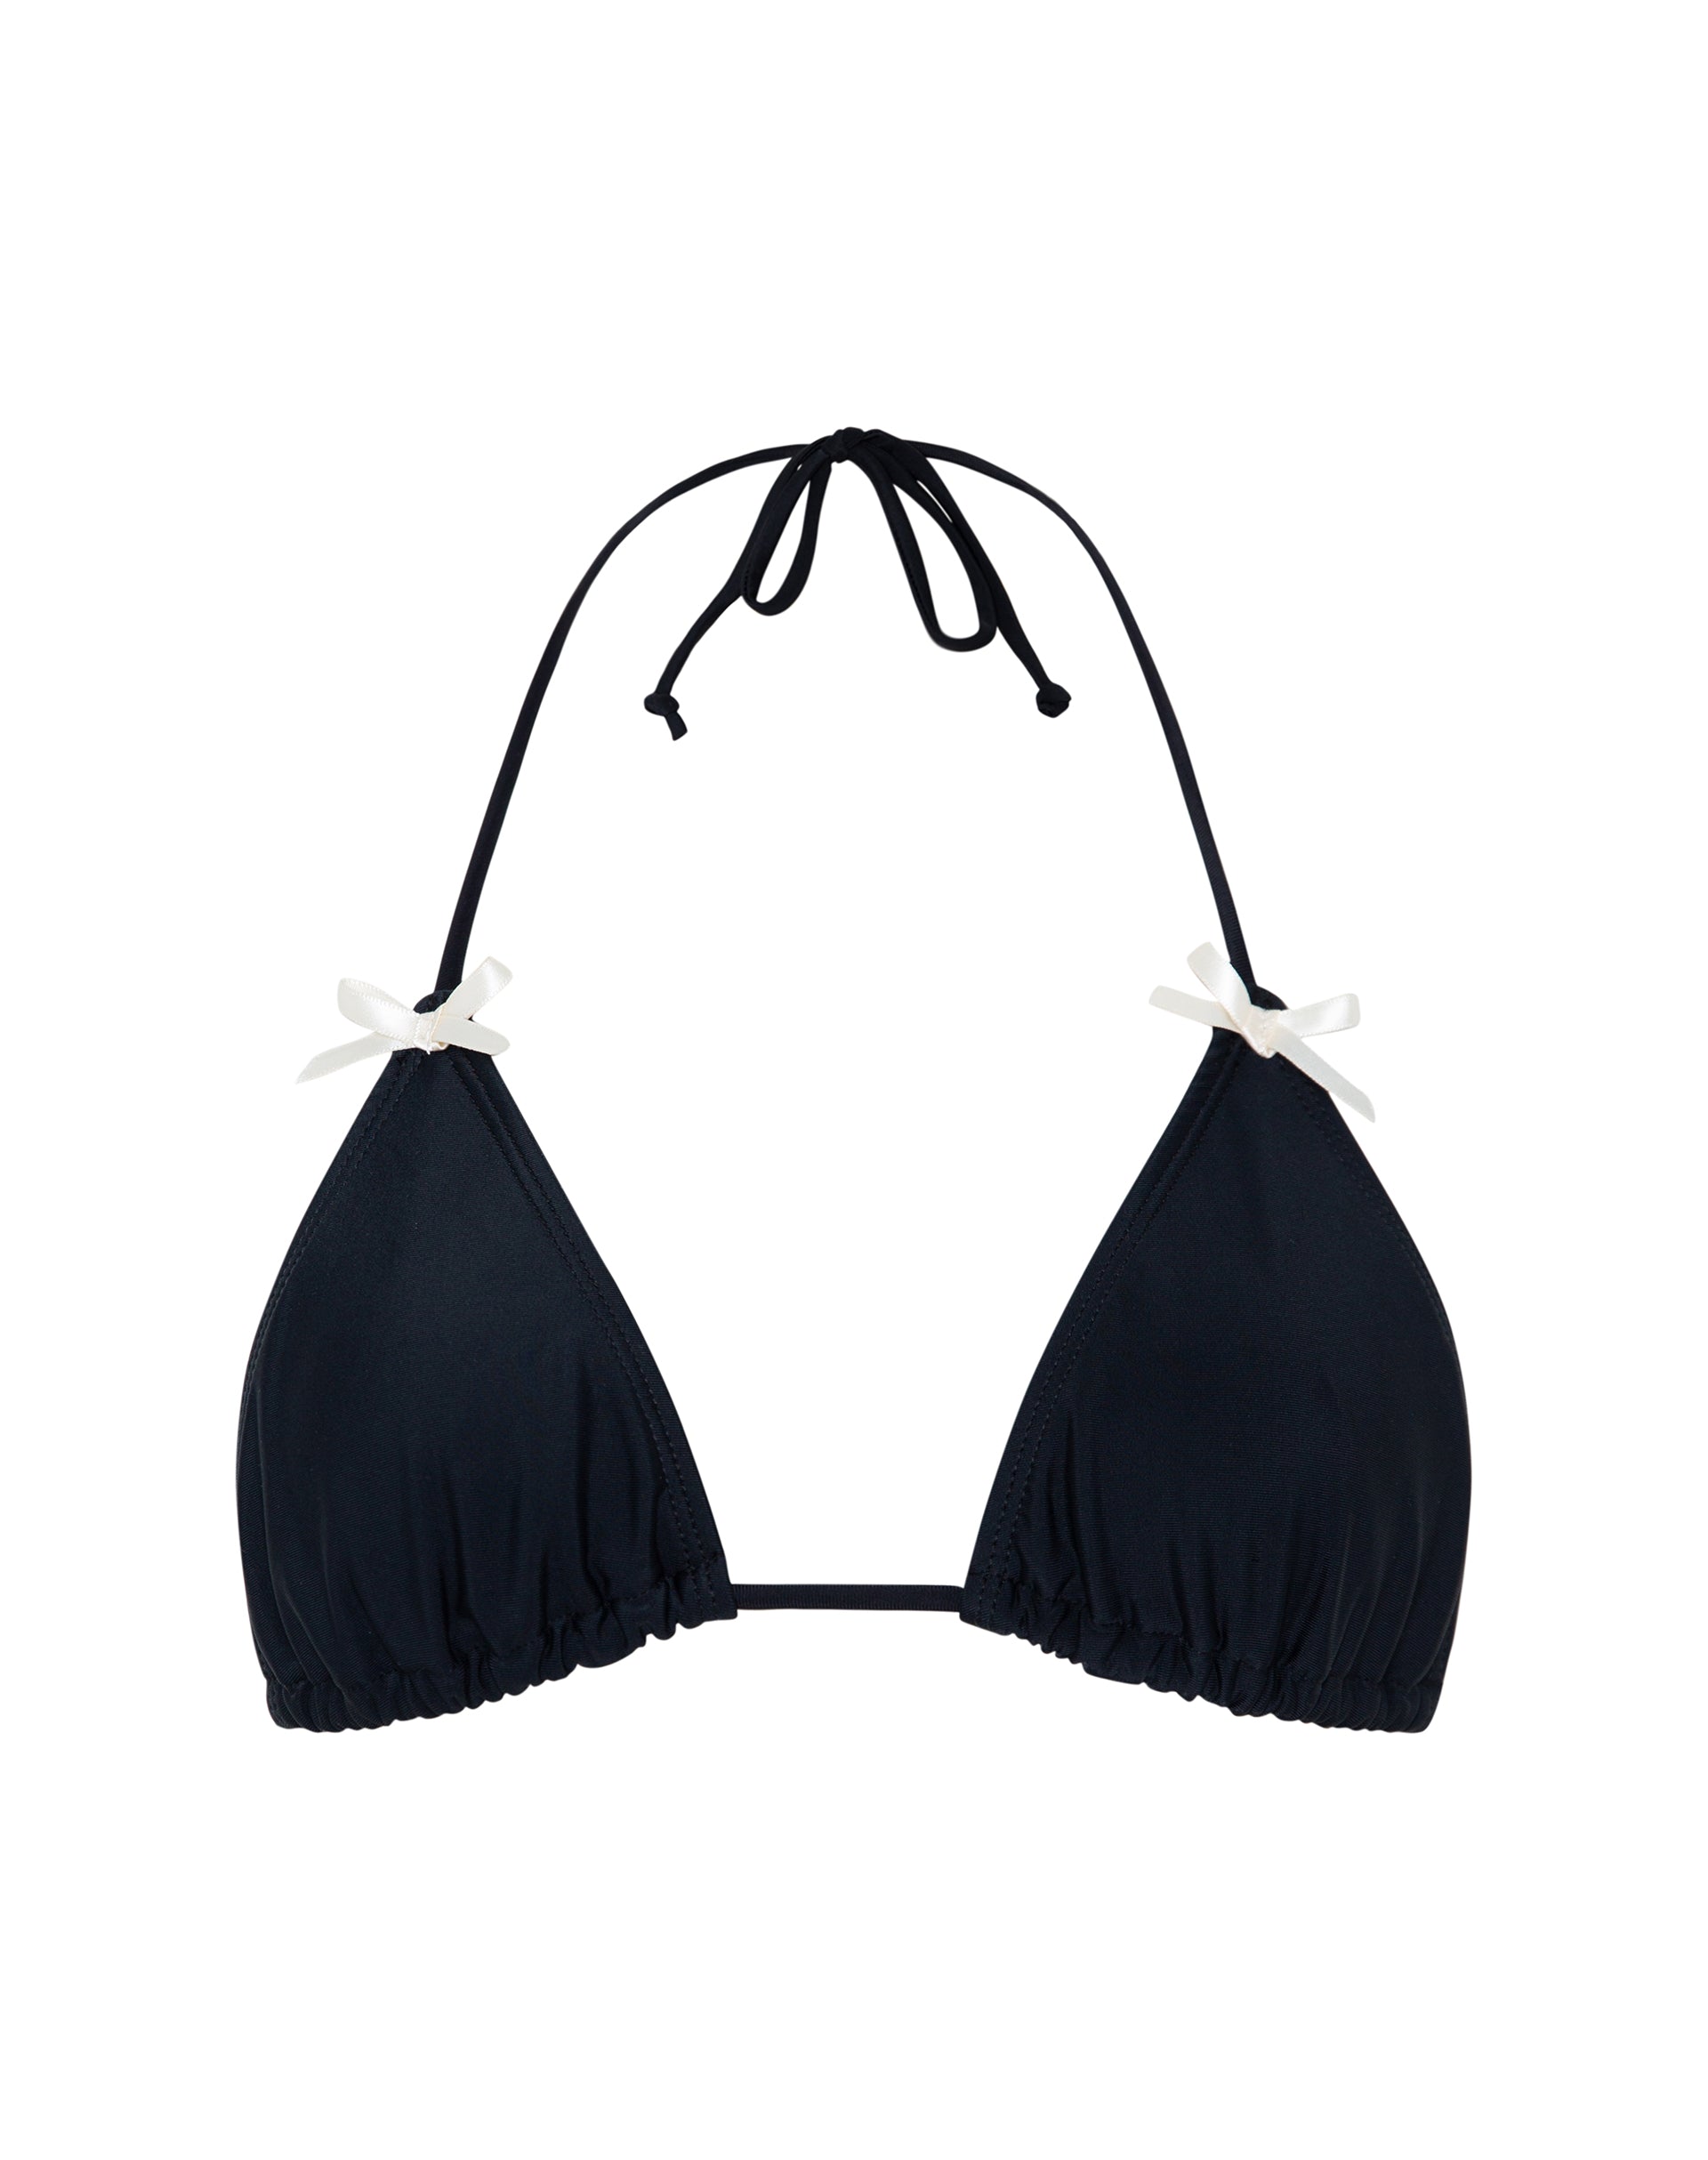 Image of Pami Bikini Top in Black with Ivory Bow